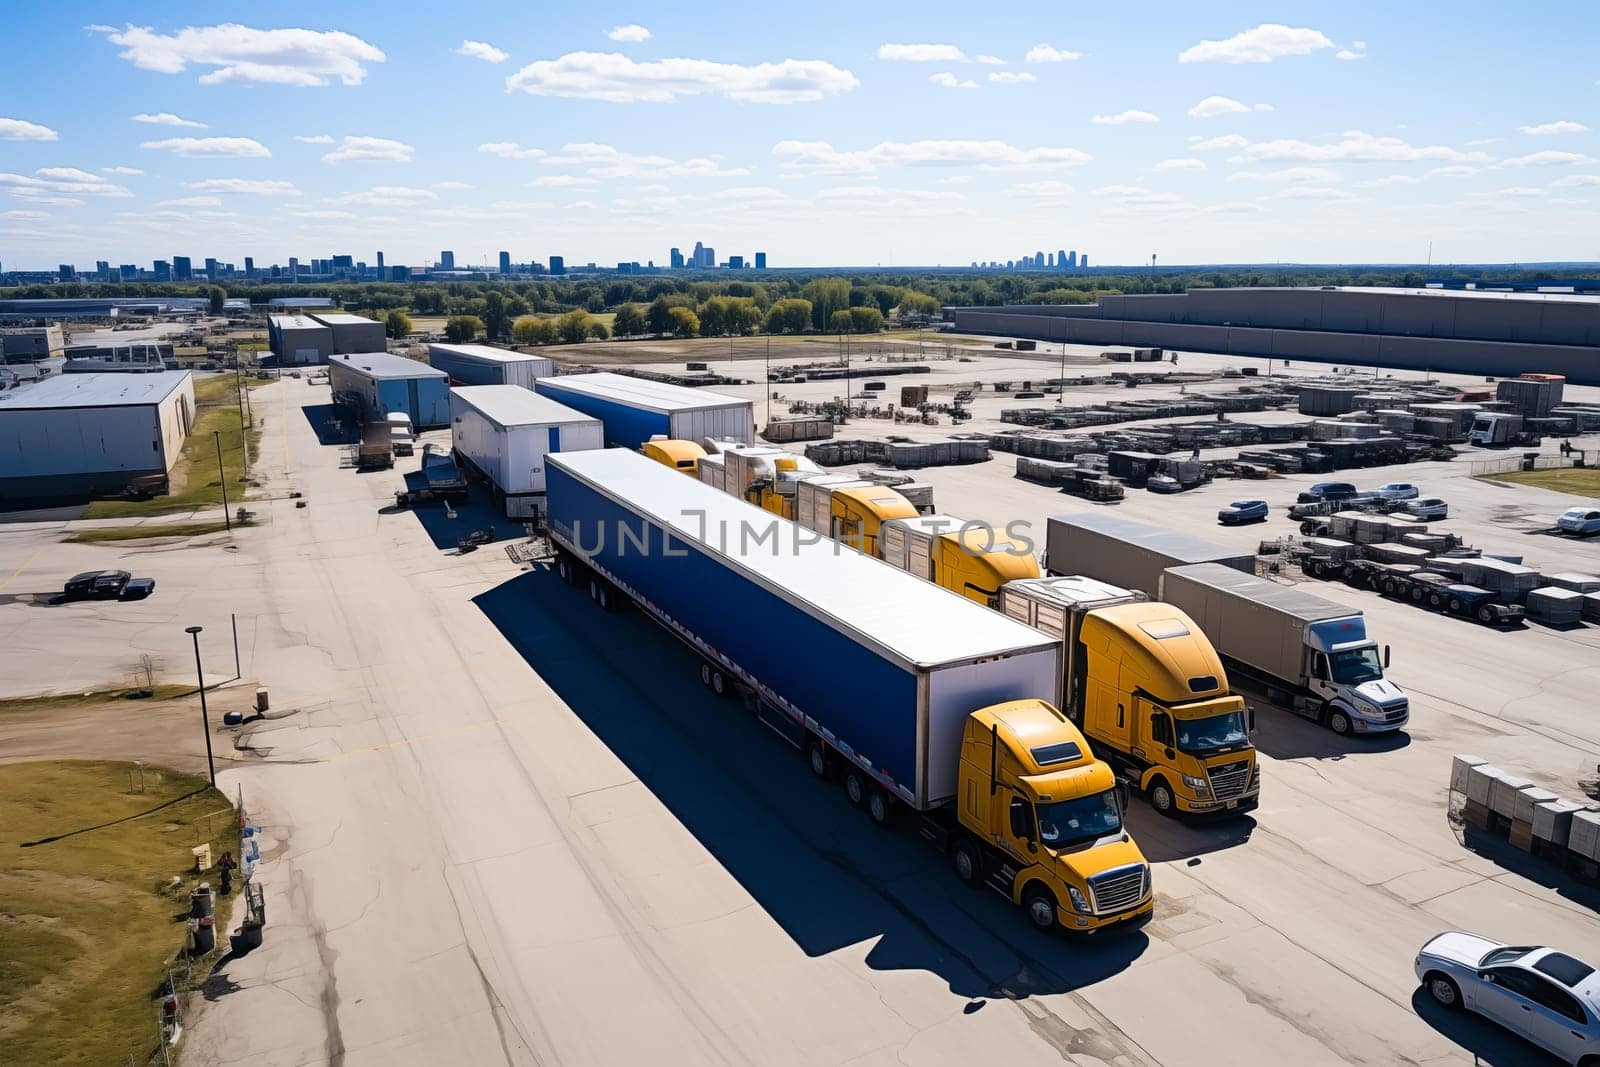 Aerial Shot of Industrial Warehouse Loading Dock where Many Truck with Semi Trailers Load Merchandise